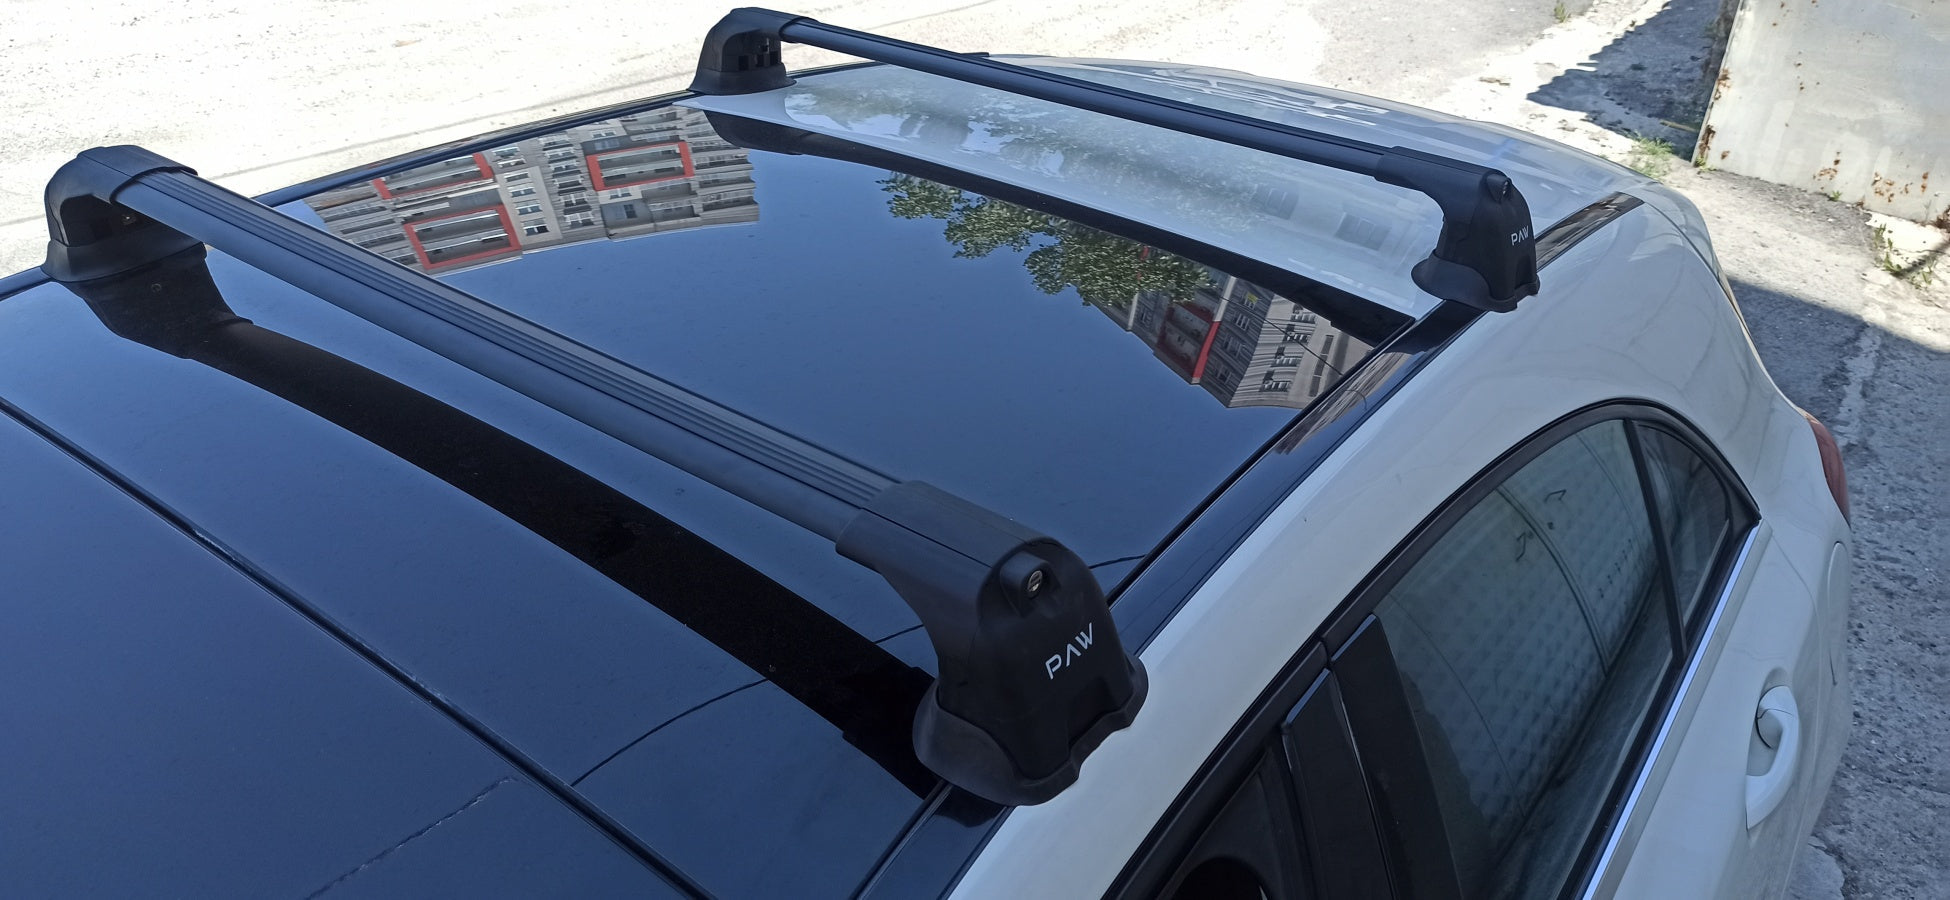 For Mercedes Benz A-Class W176 2012-2018 Roof Rack System Carrier Cross Bars Aluminum Lockable High Quality of Metal Bracket Silver-6